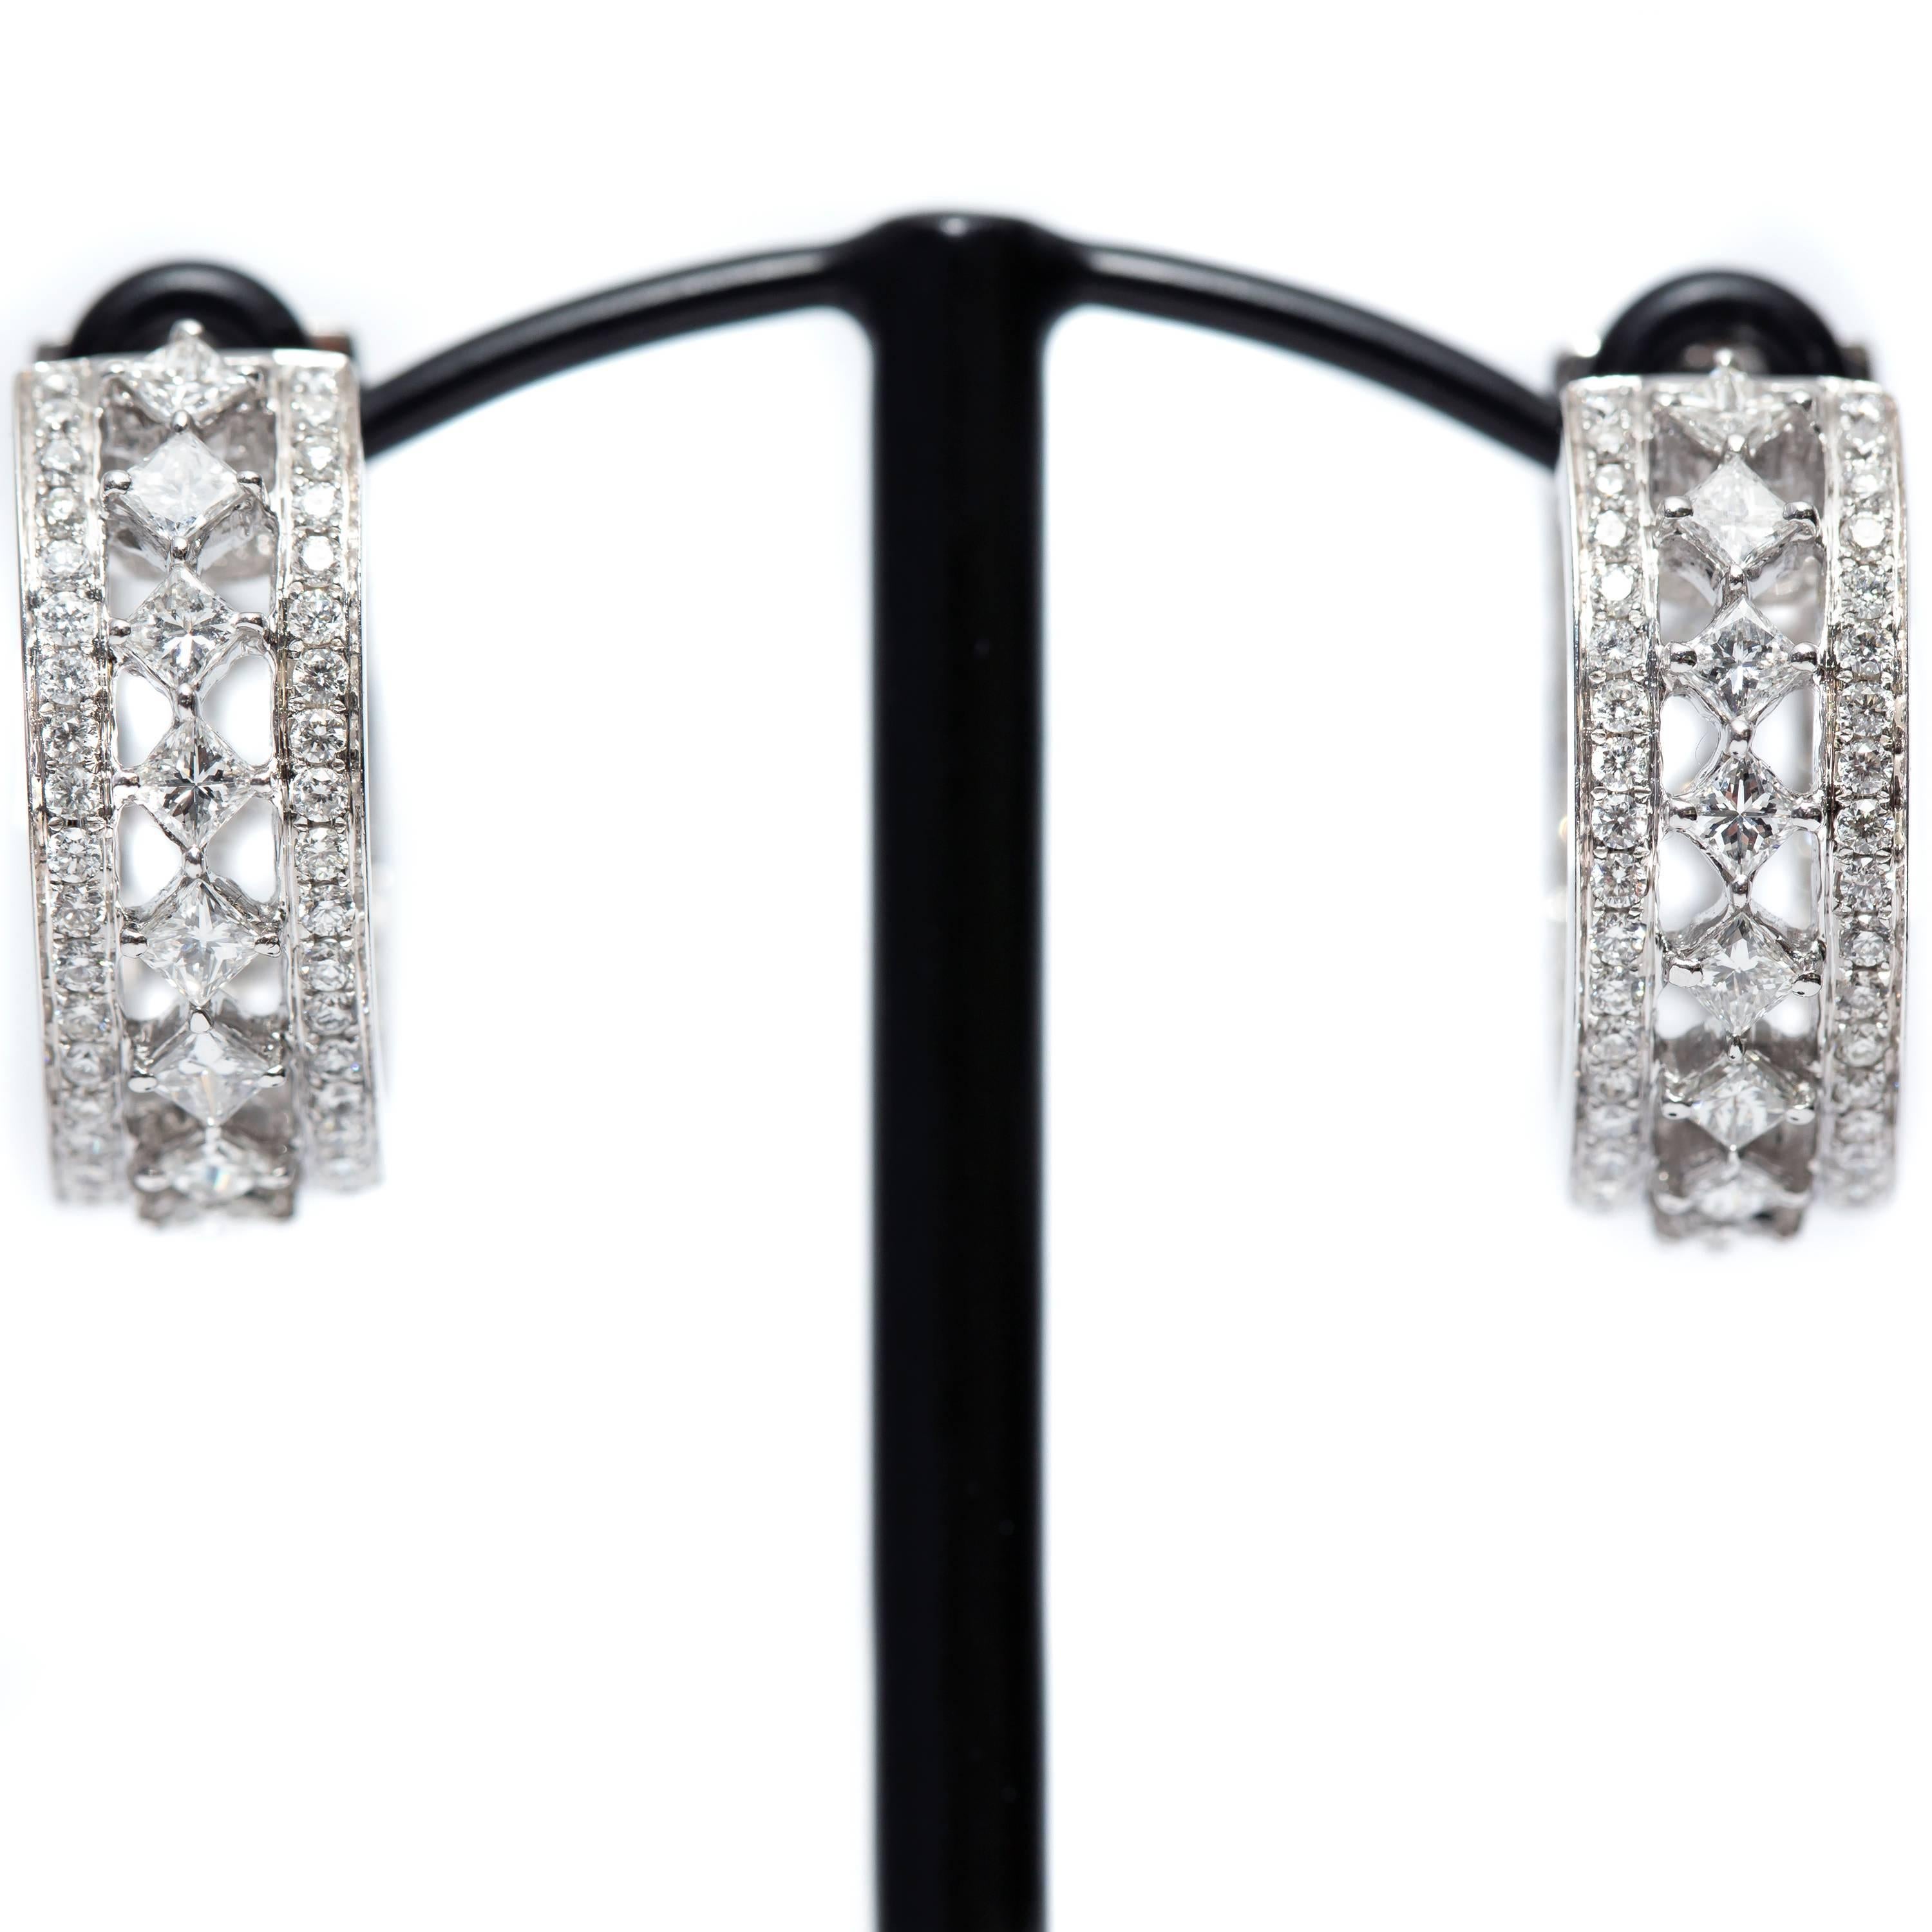 An impressive and cleverly set 3.50 Carat Diamond, 1.92 Carat Round and 1.58 Carat Princess cut hoop earrings set in 18 Karat White Gold, with color H and clarity SI1. The princess cut Diamonds are set diagonally in a channel design between two rows